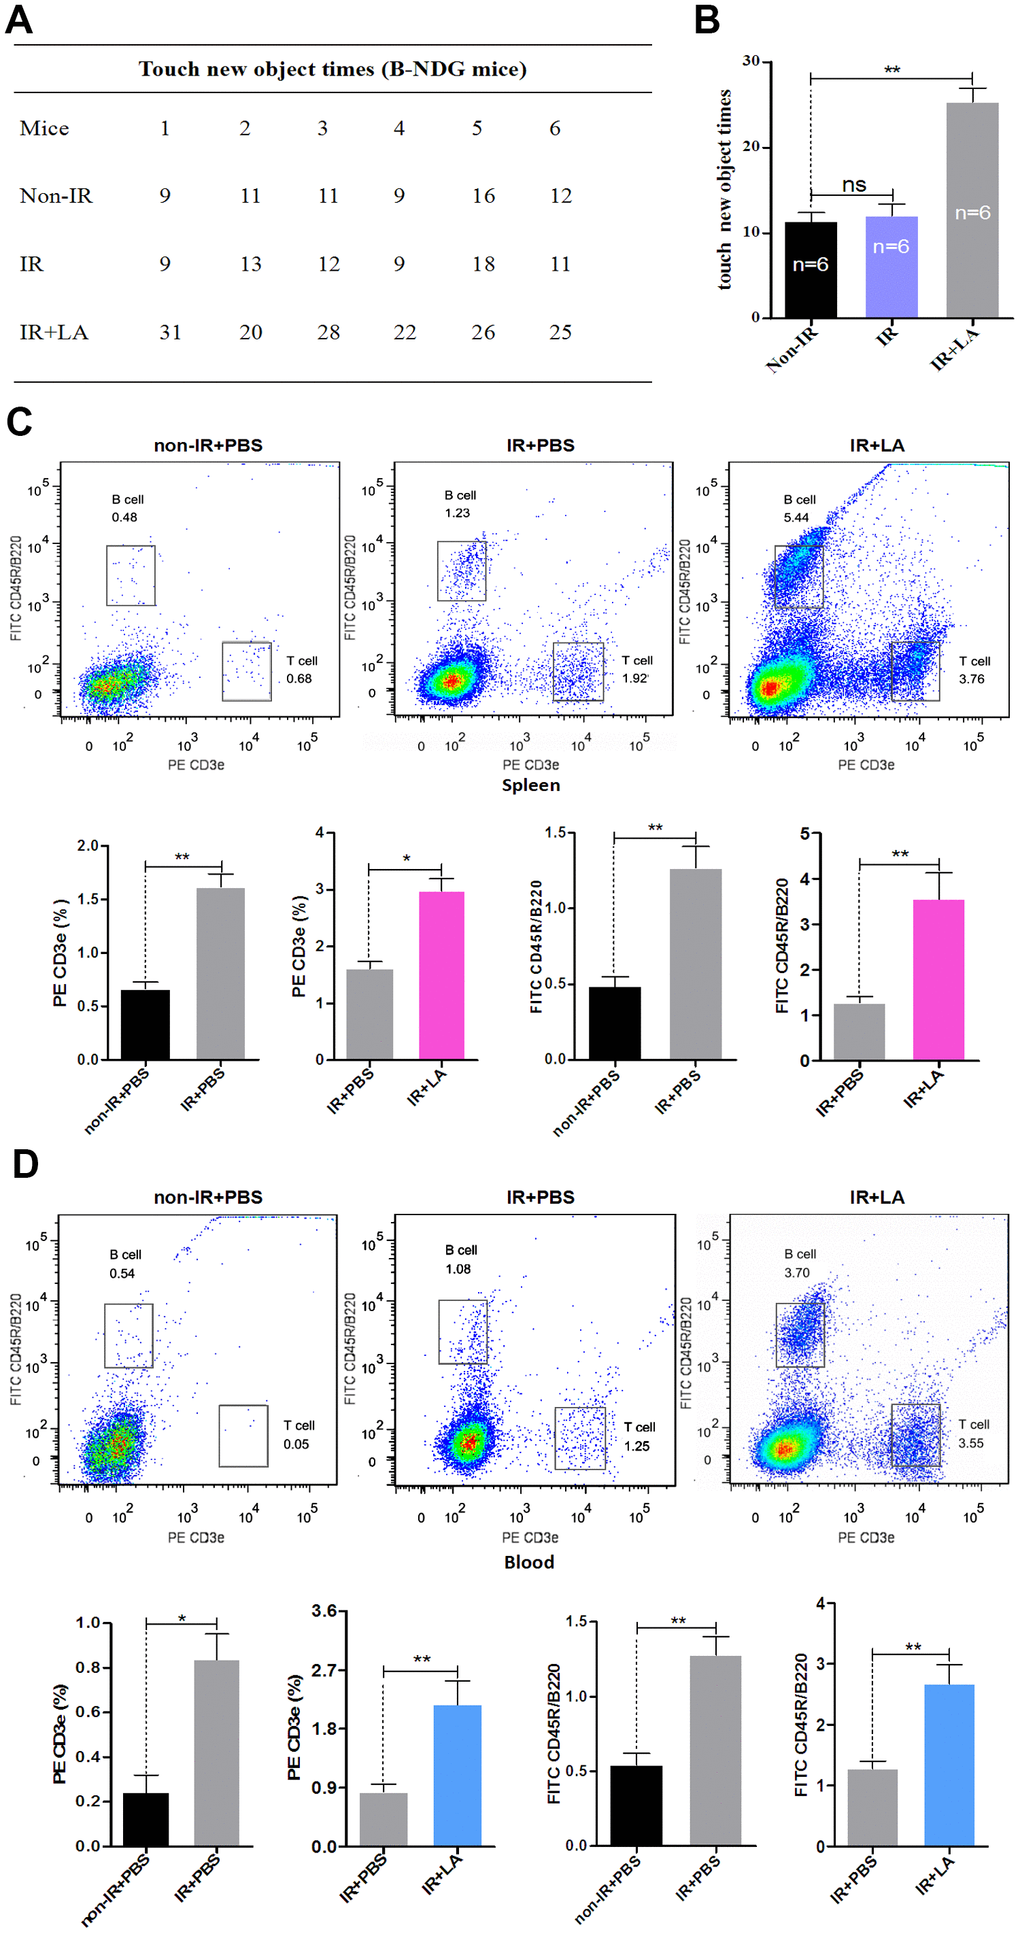 Effect of LA on T- and B-cell proliferation in B-NDG mice. (A) New object recognition results for the IR+LA, IR and non-IR groups. (B) Statistical analysis of the results shown in (A). (C, D) T- and B-cell proliferation in the spleen (C) and whole blood (D). The data are presented as the mean±SD of three independent experiments. Statistical significance was determined using unpaired t-tests. *p p 